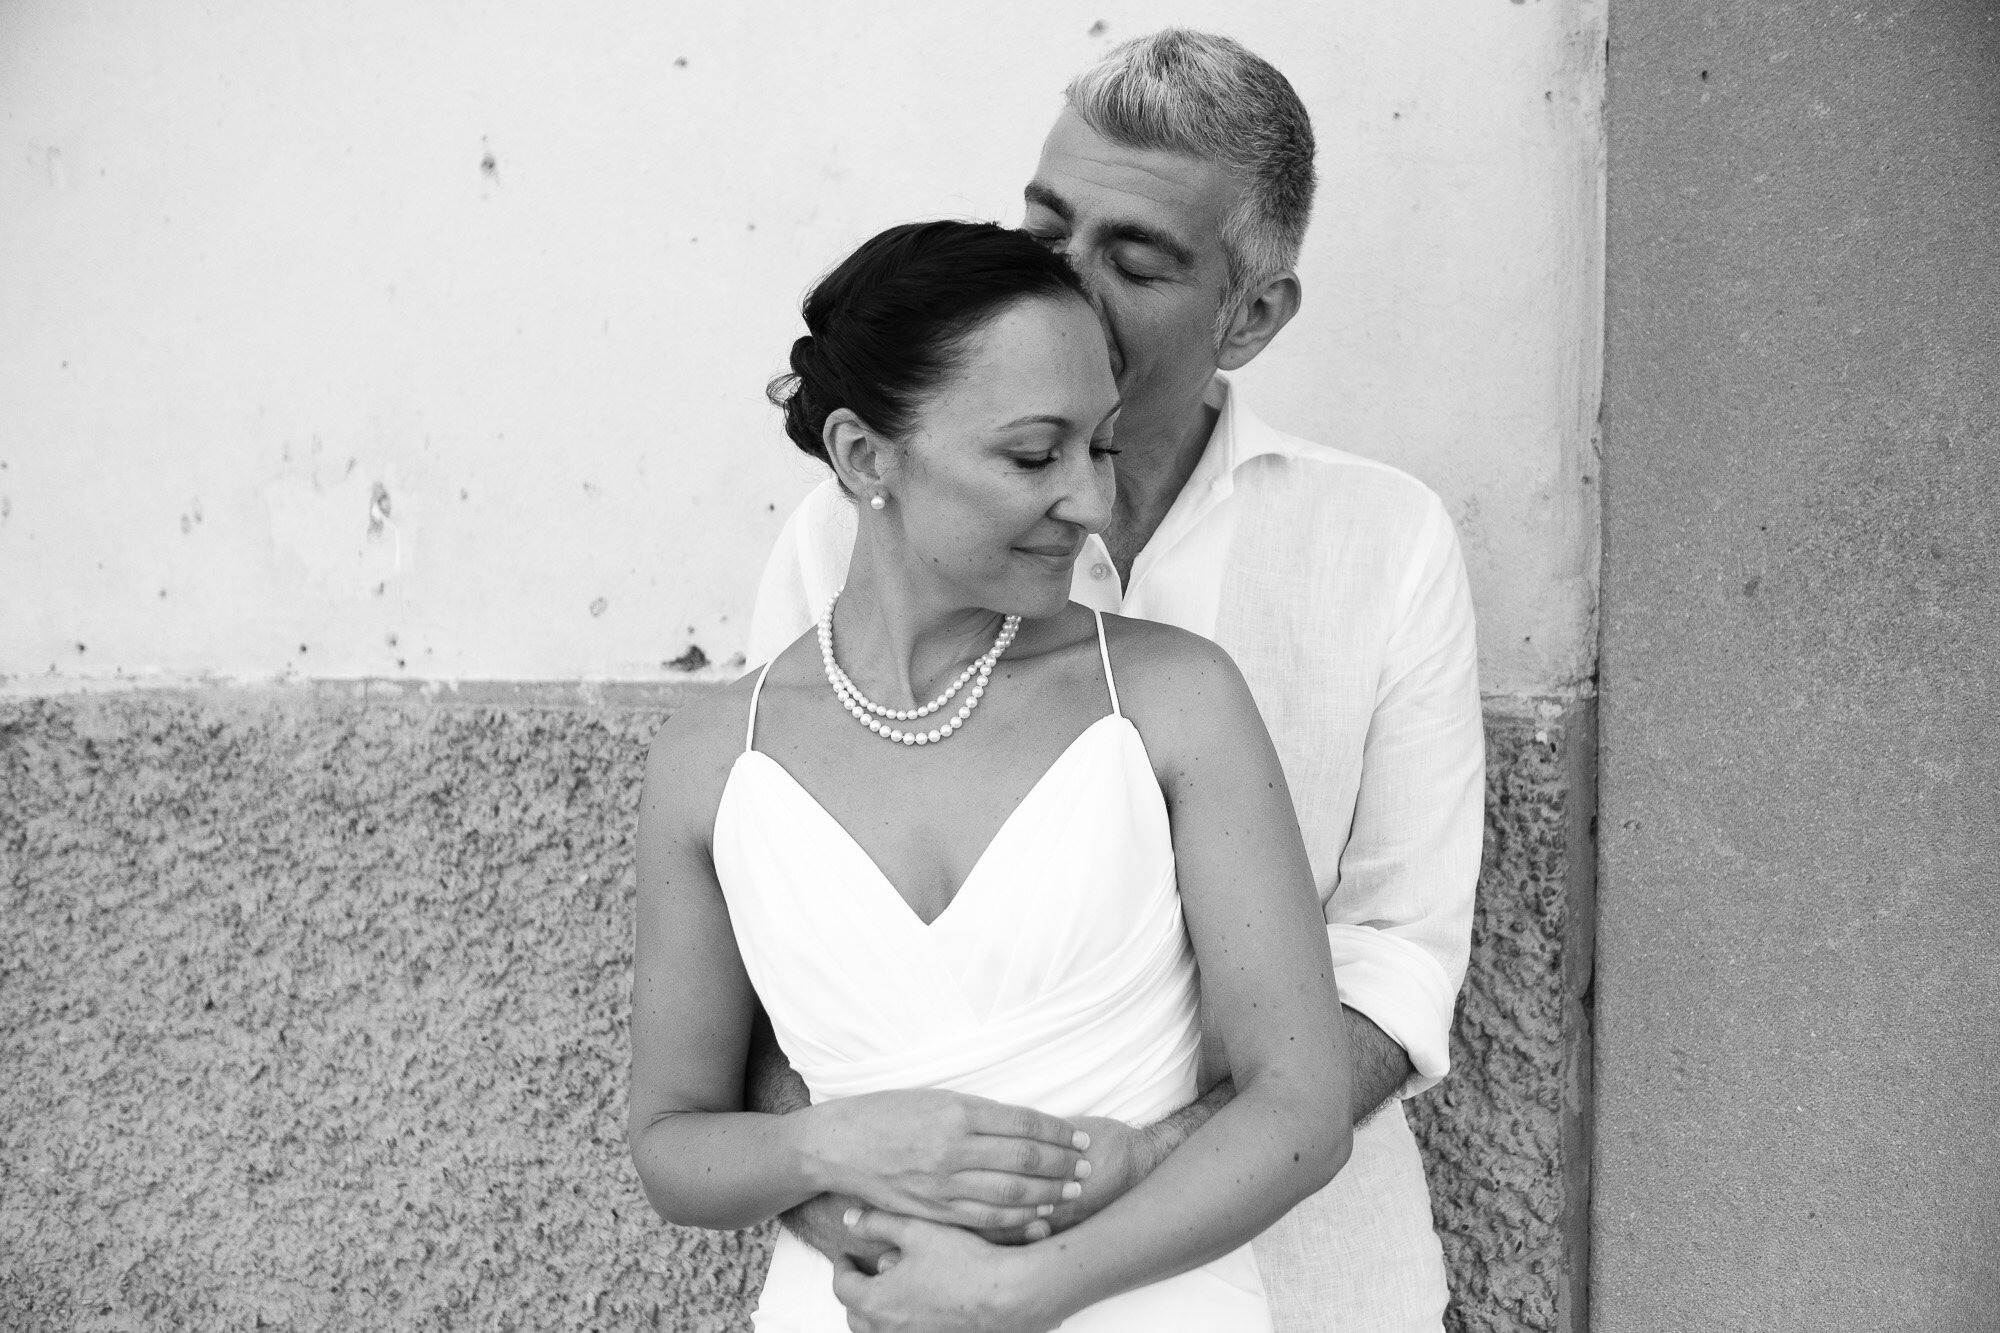  Elena and Steve pose for a relaxed portrait in the piazza in Pontassieve after the civil ceremony at Pontassieve’s city hall during their destination wedding in Tuscany, Italy by wedding photographer Scott Williams (www.scottwilliamsphotographer.com